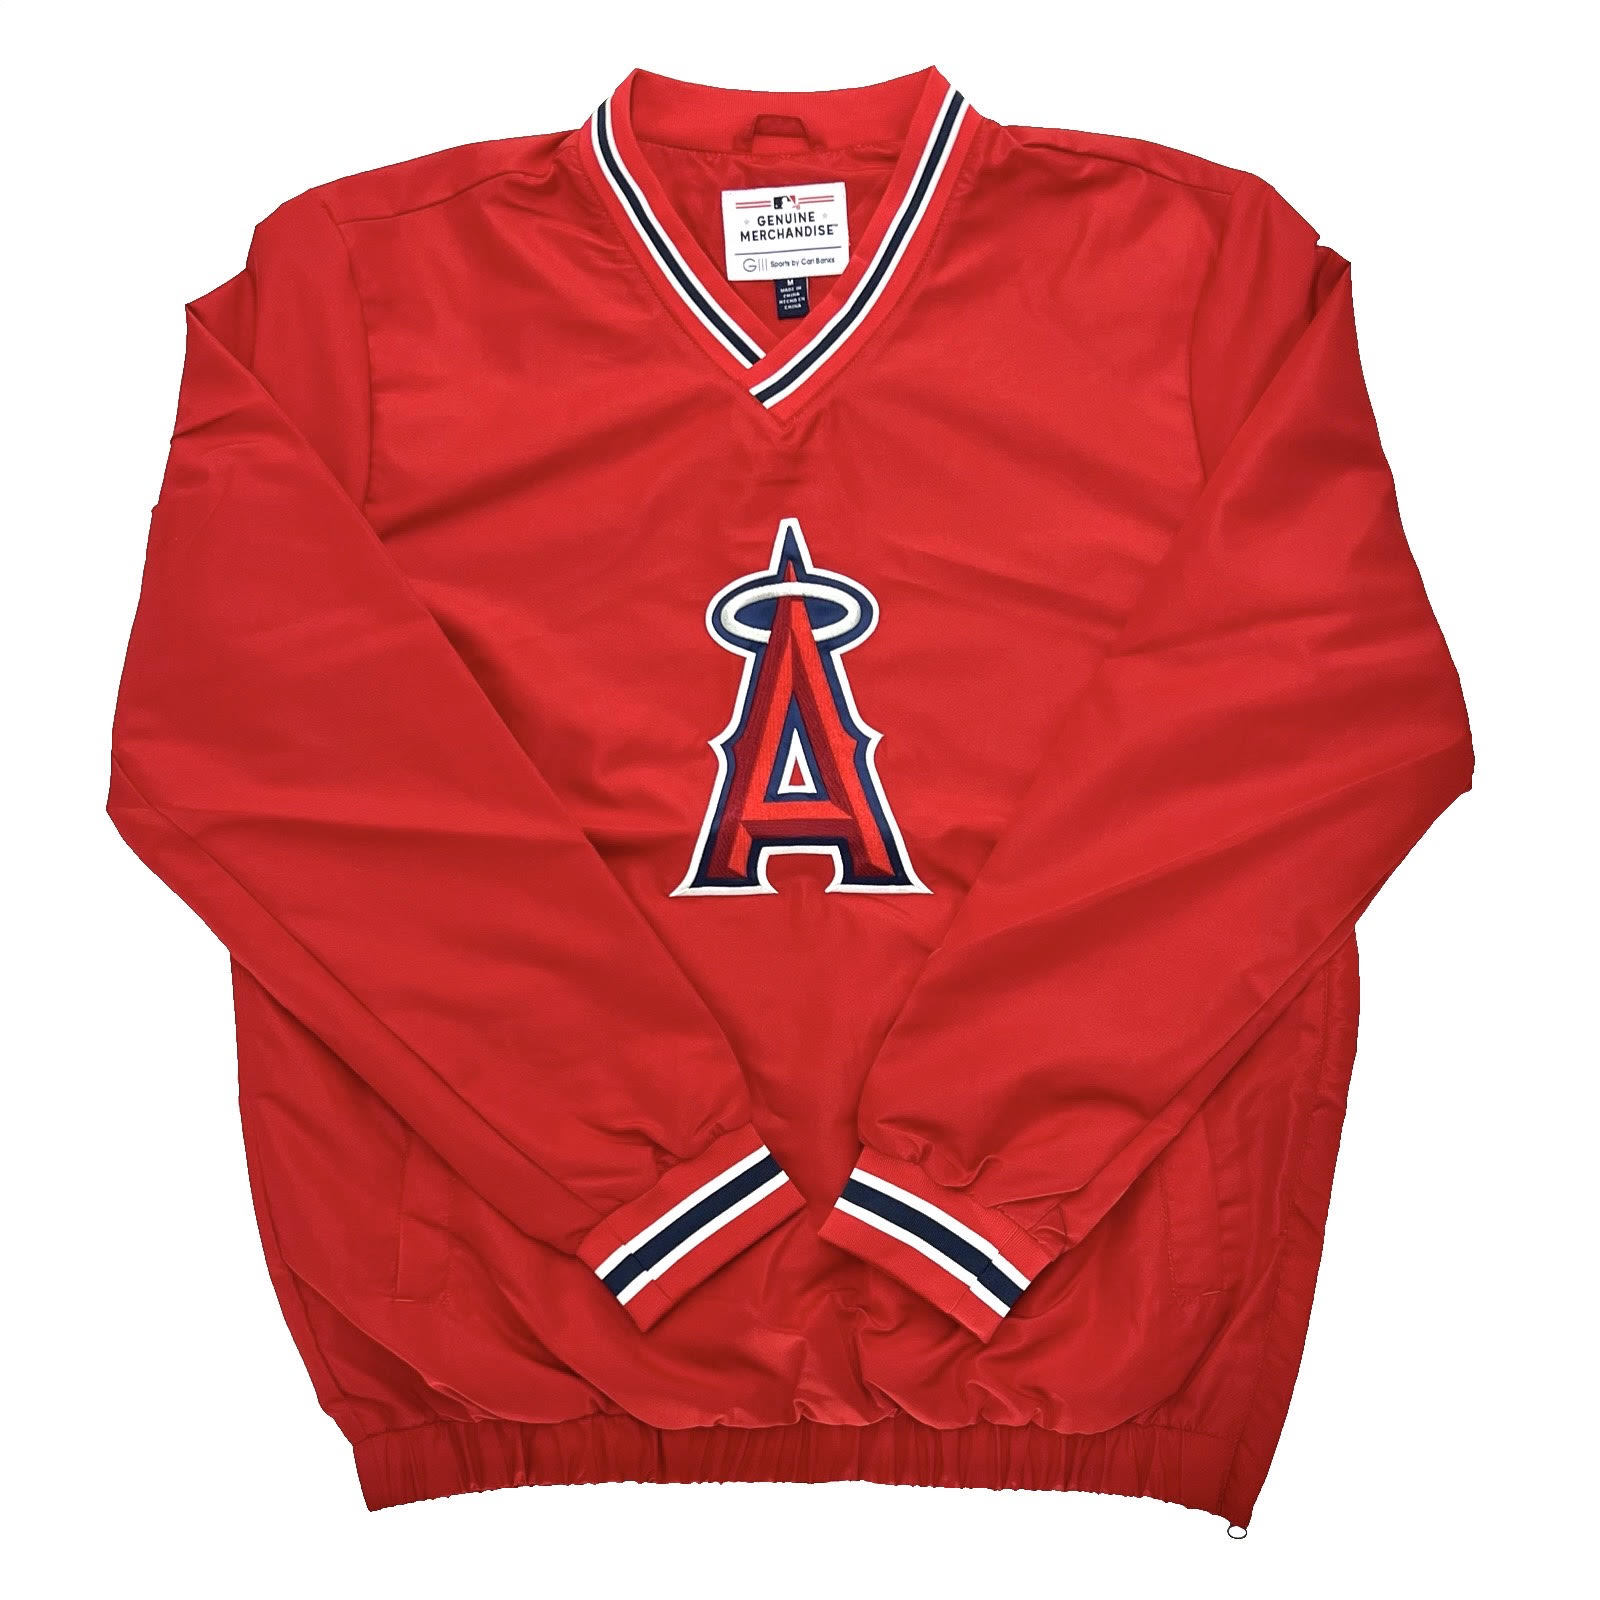 Los Angeles Angels Windbreaker with Pocket - Navy Navy / 3X Large